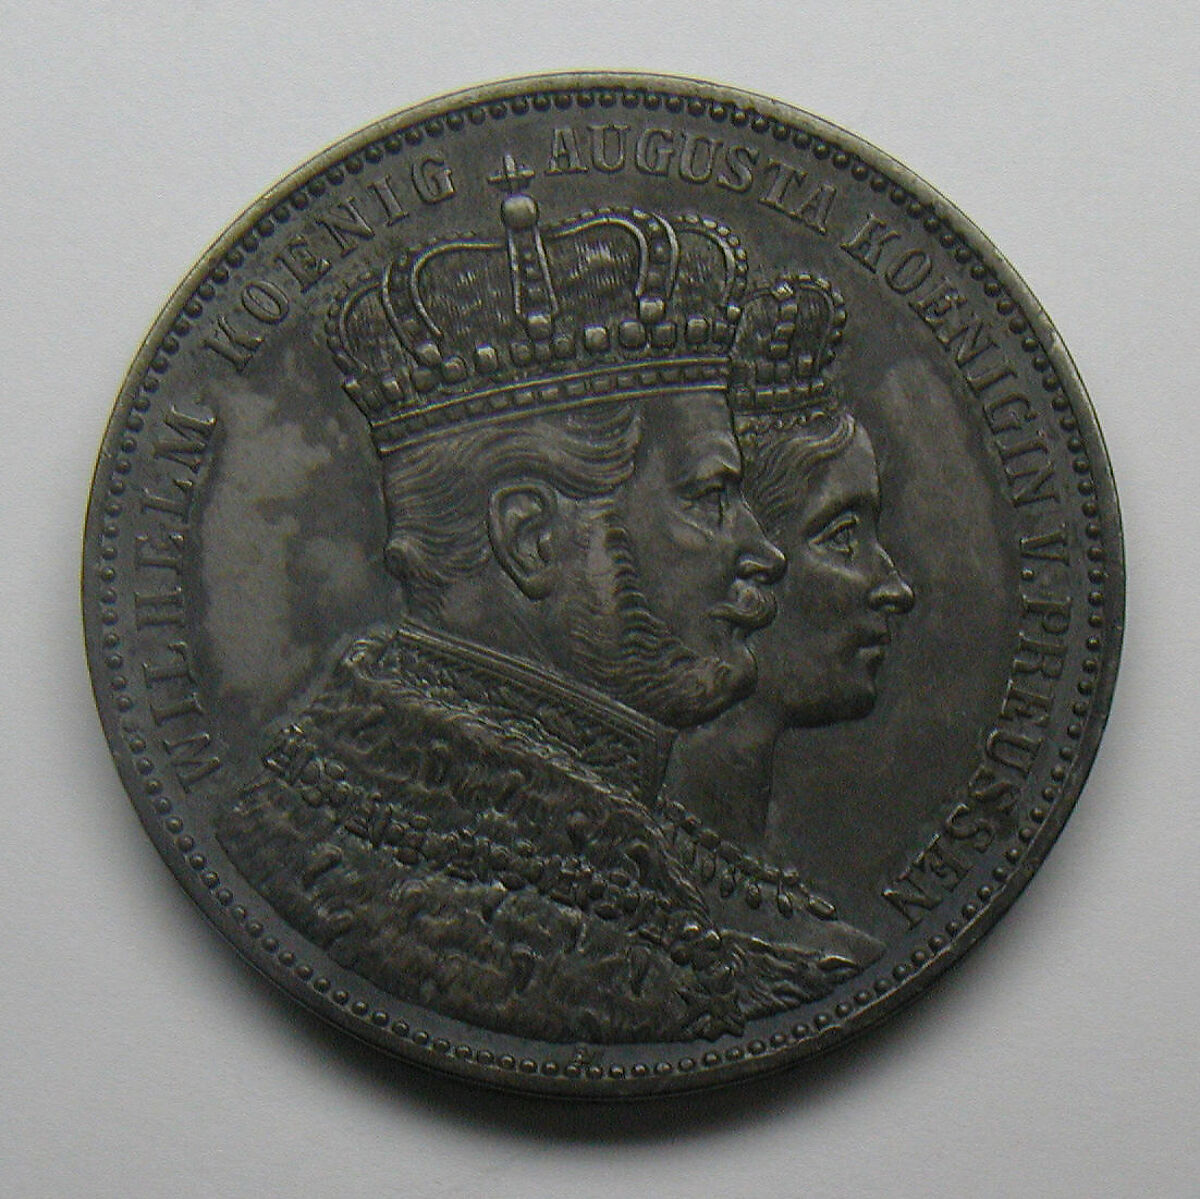 Coronation thaler of King William I and Queen Augusta of Prussia, Silver, German 